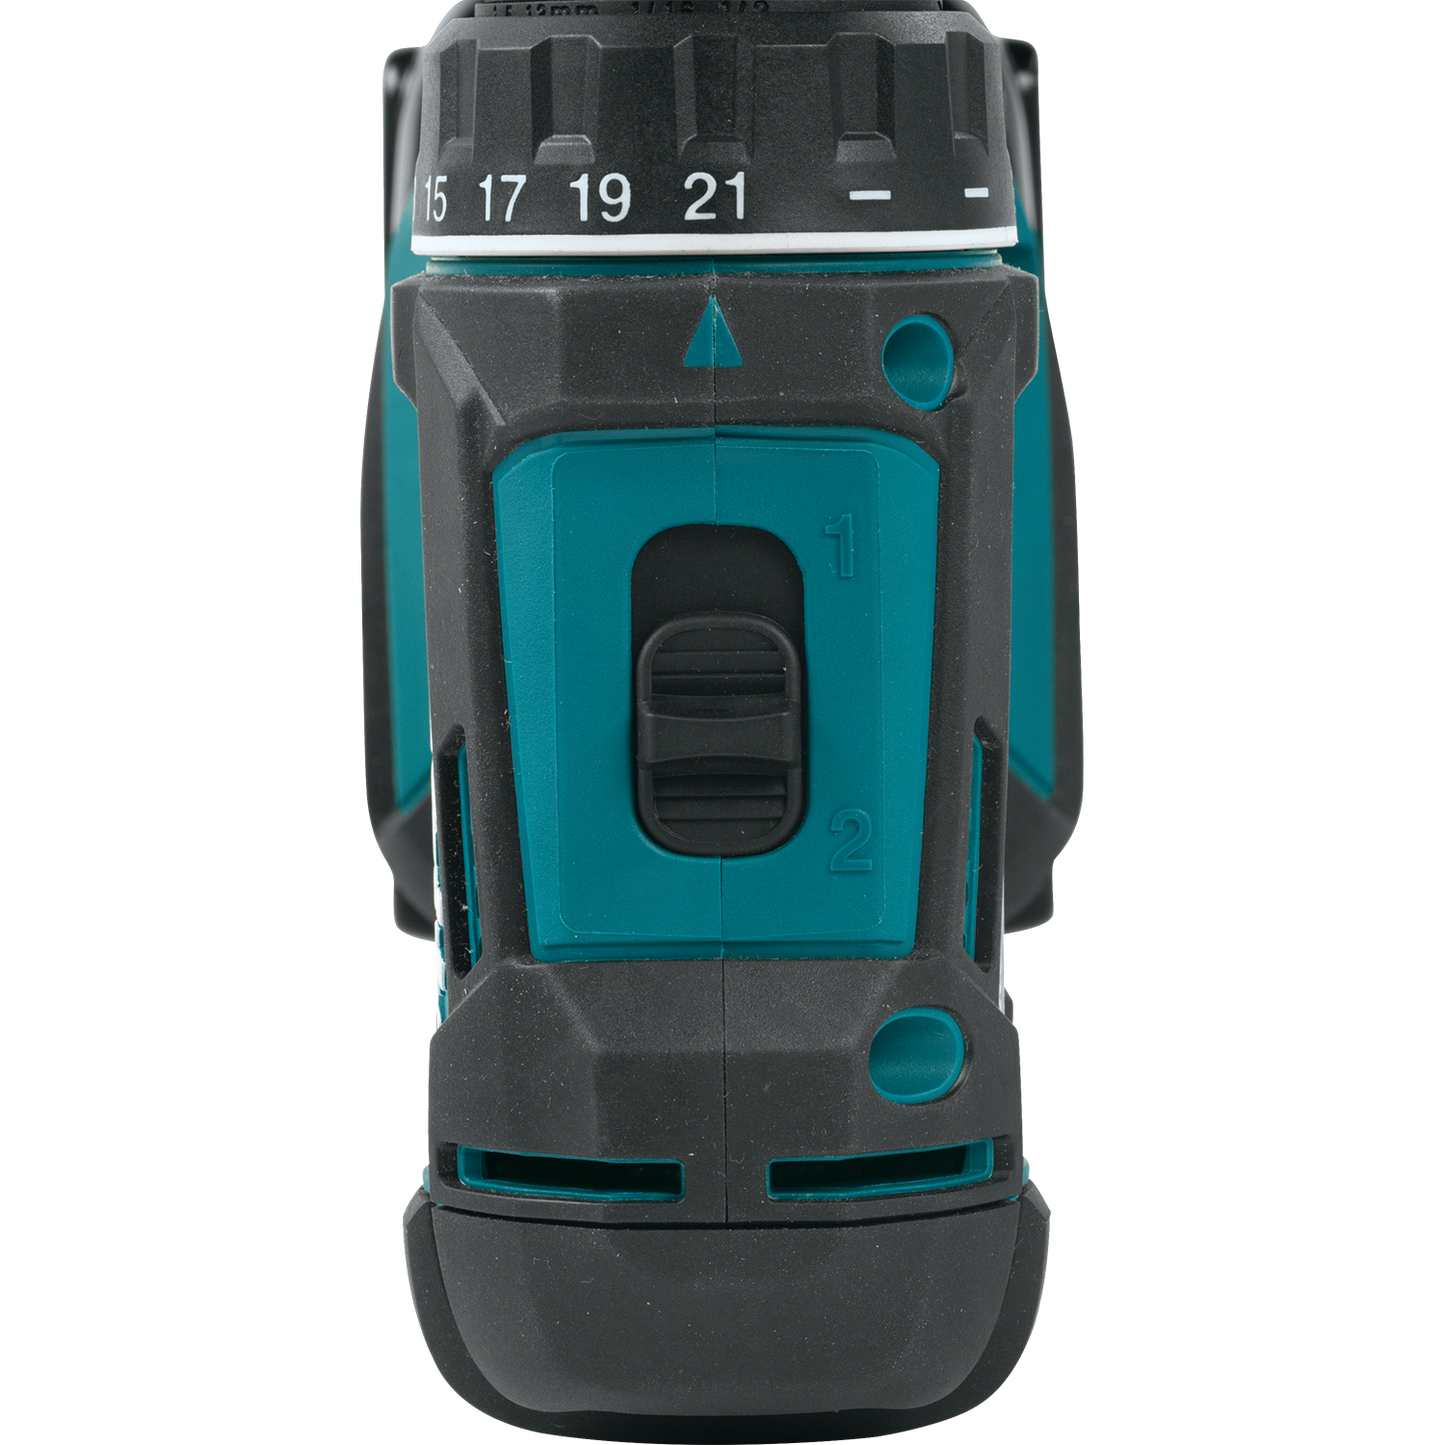 Makita 18 Volt LXT Lithium Ion Compact Cordless 2 Piece Combo Kit Factory Serviced OUT OF STOCK 8-25-23